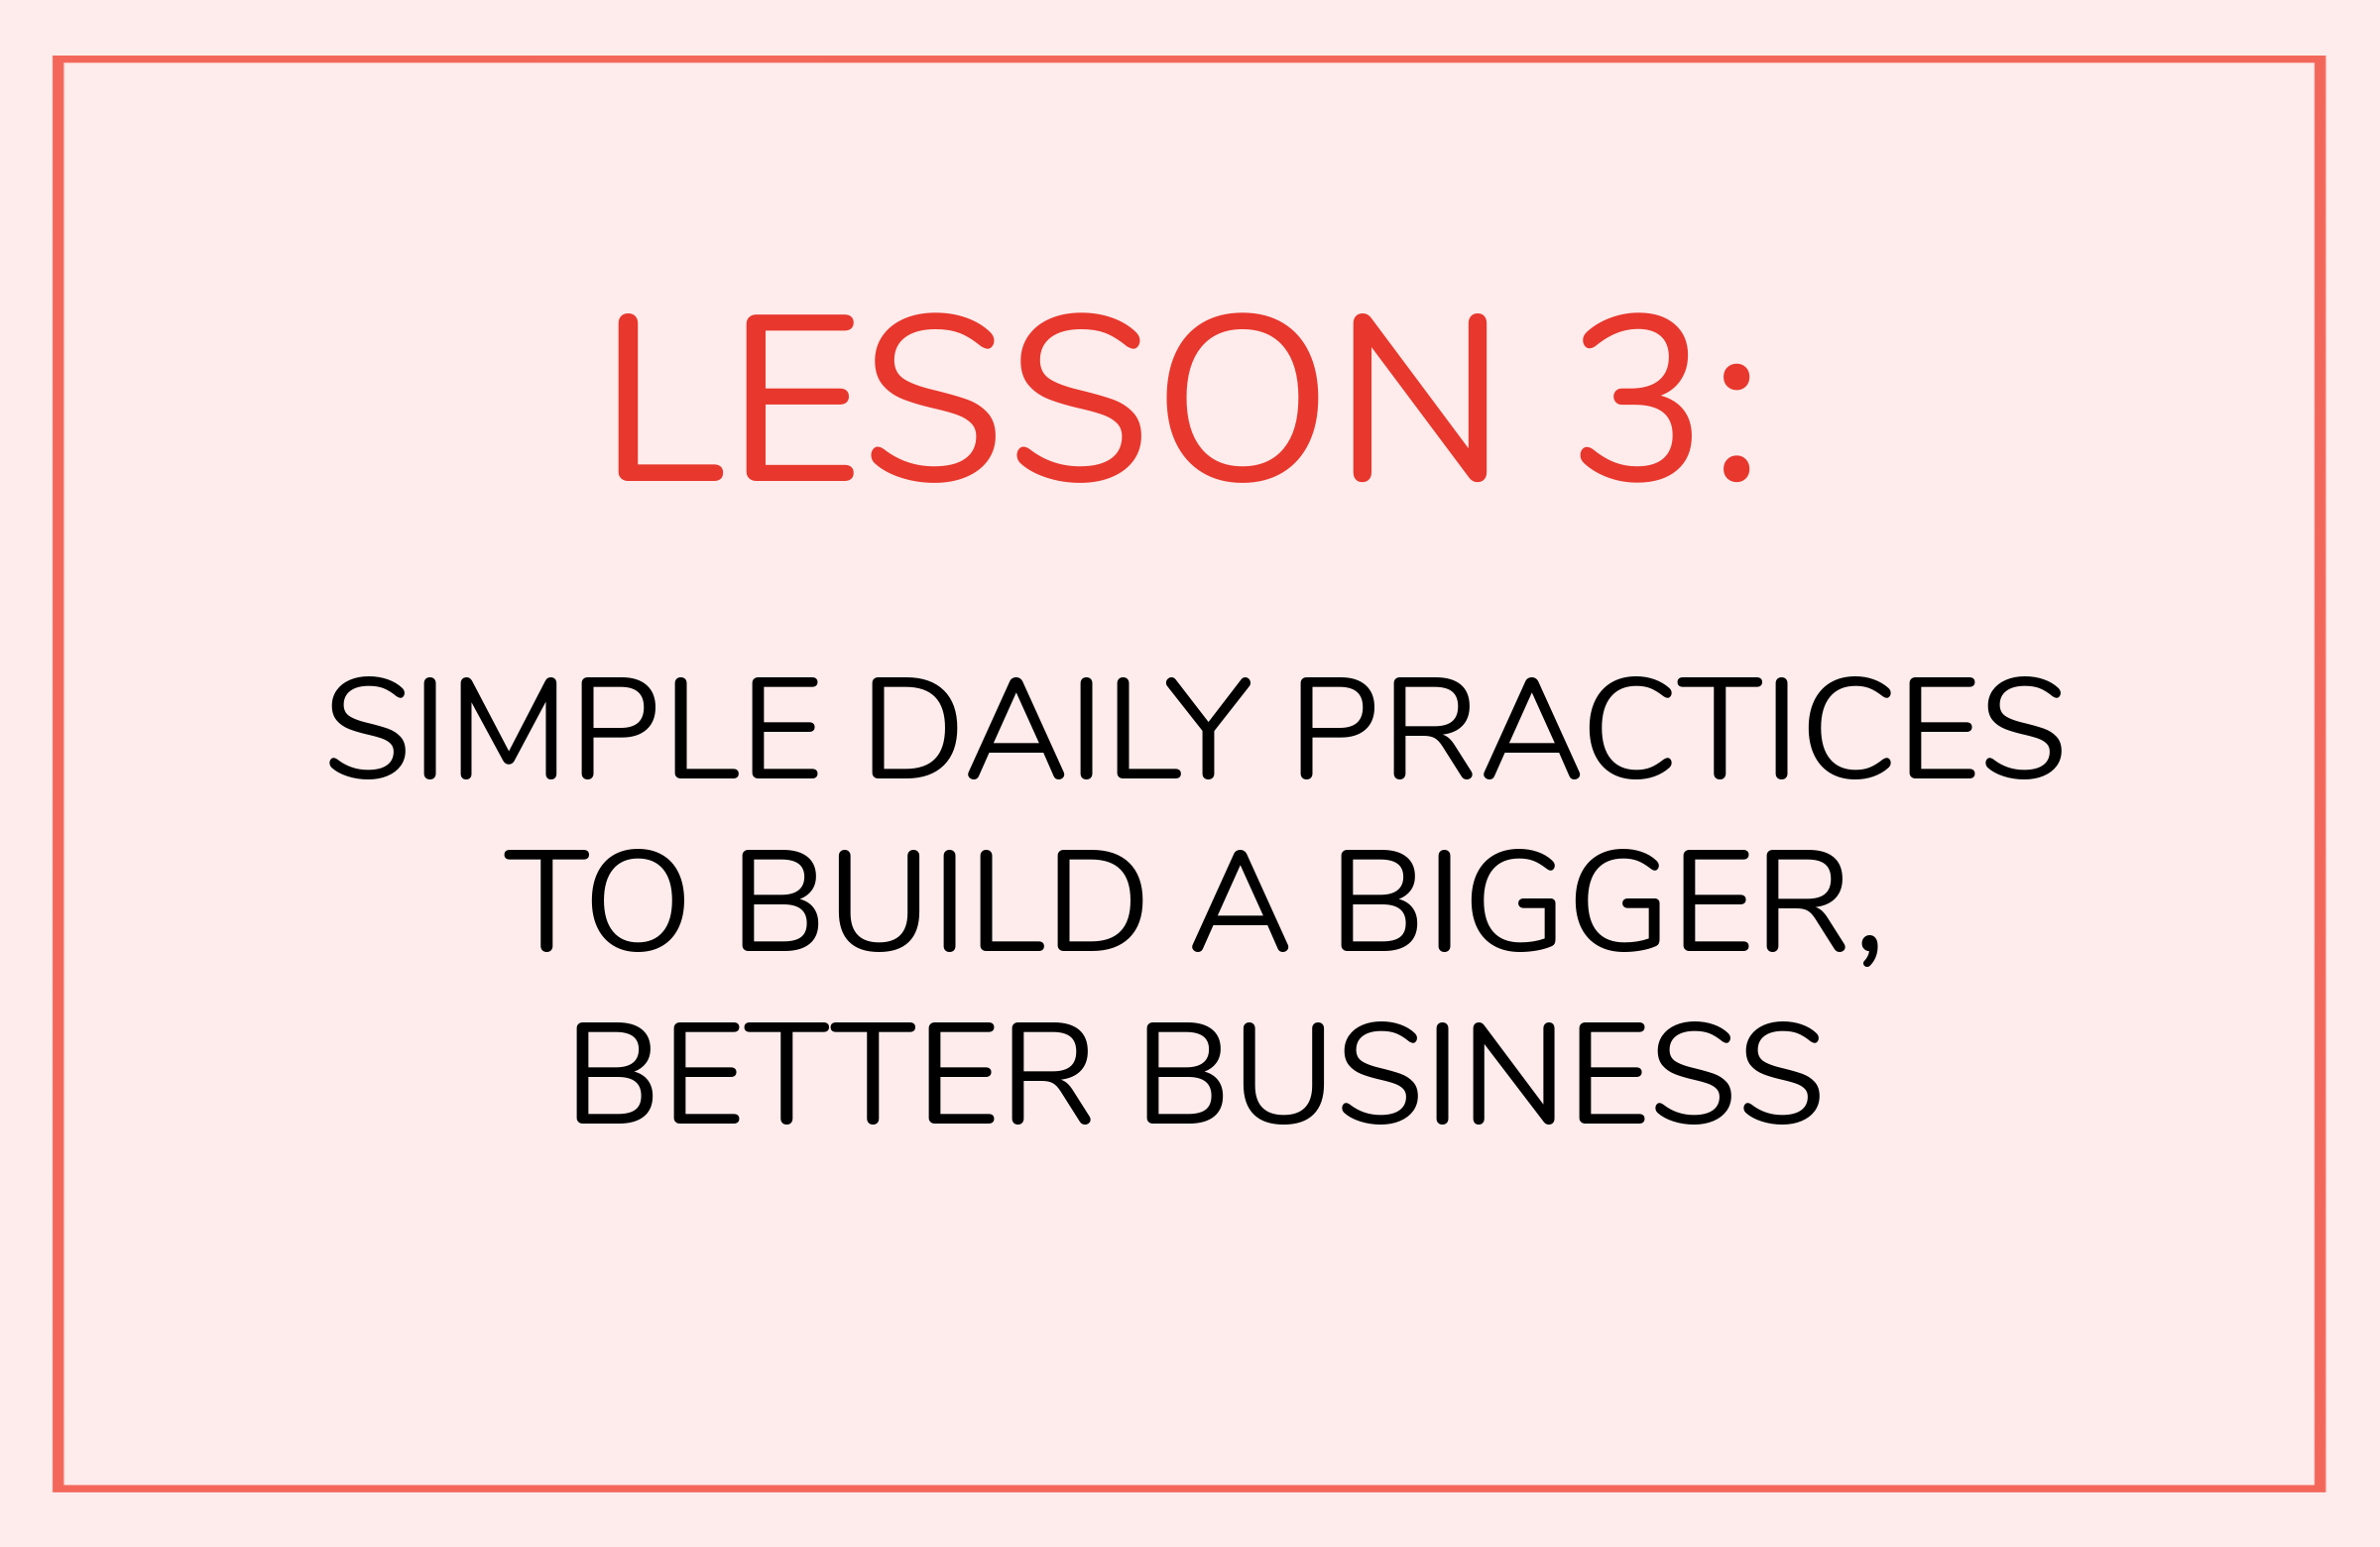 LESSON 3: Simple daily practices to build a bigger, better business